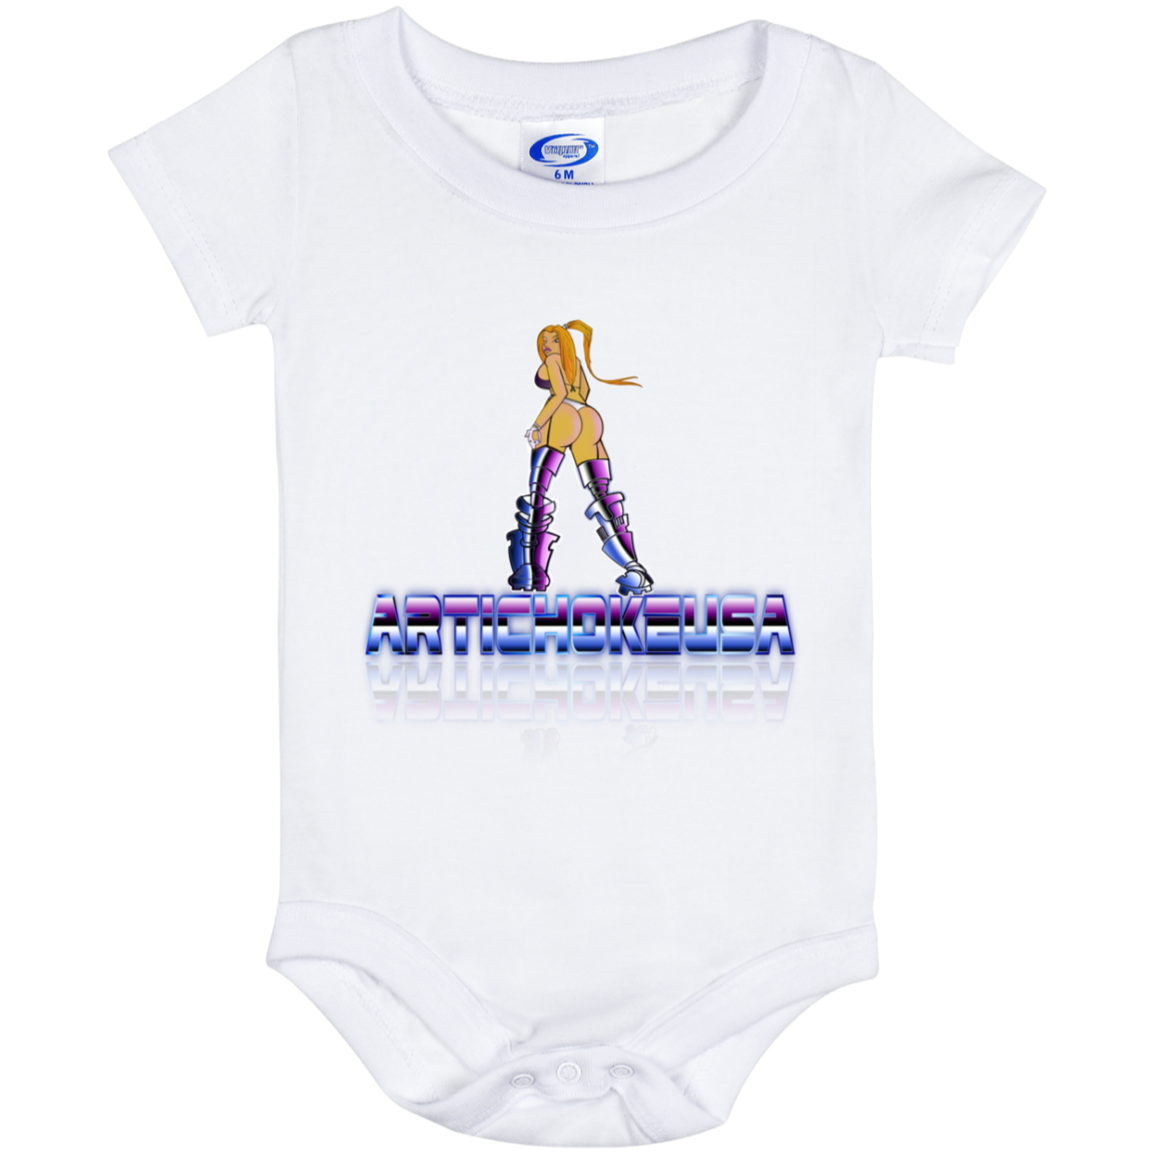 ArtichokeUSA Character and Font design. Let's Create Your Own Team Design Today. Dama de Croma. Baby Onesie 6 Month